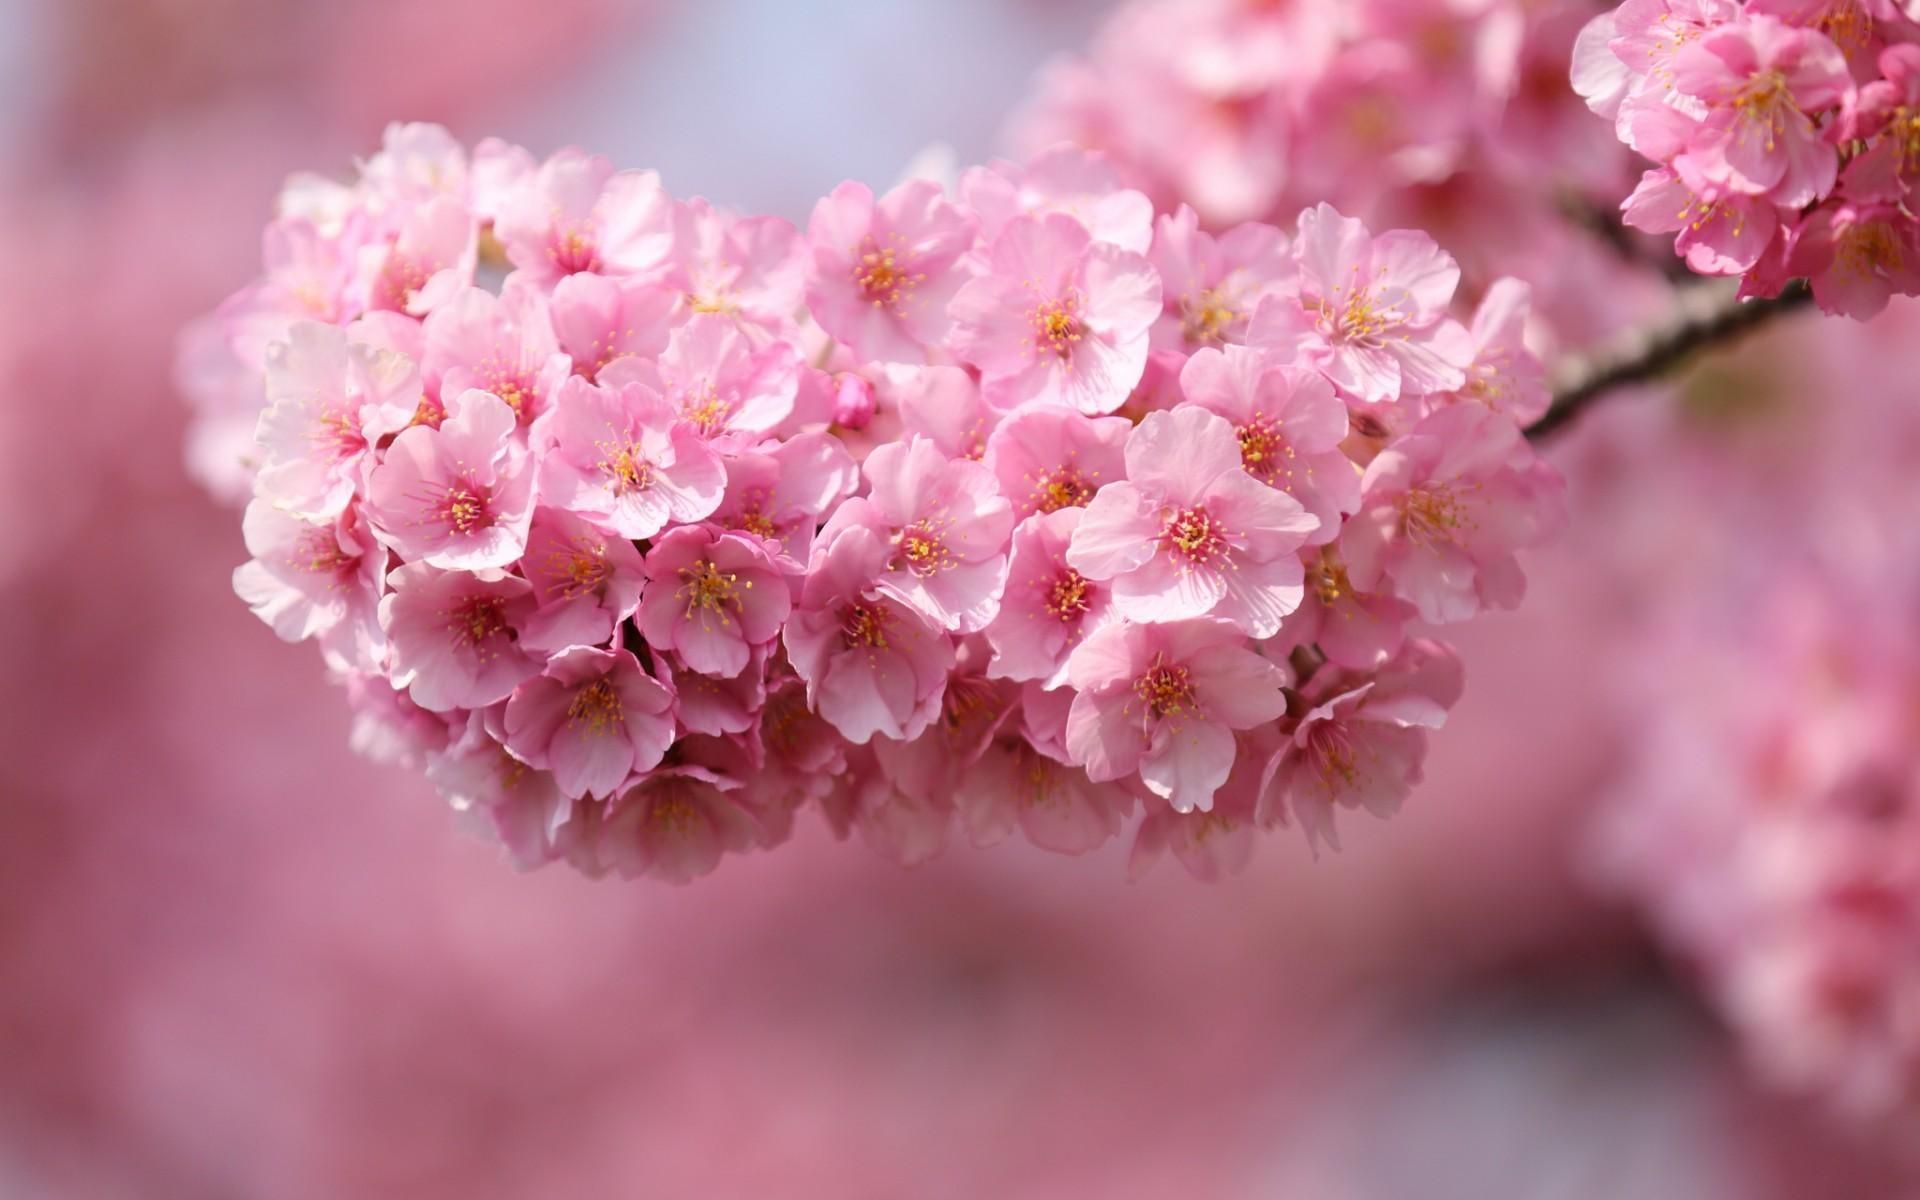 Flowers Blossom Pink blossoms HD Wallpapers, Desktop Backgrounds, Mobile Wallpapers